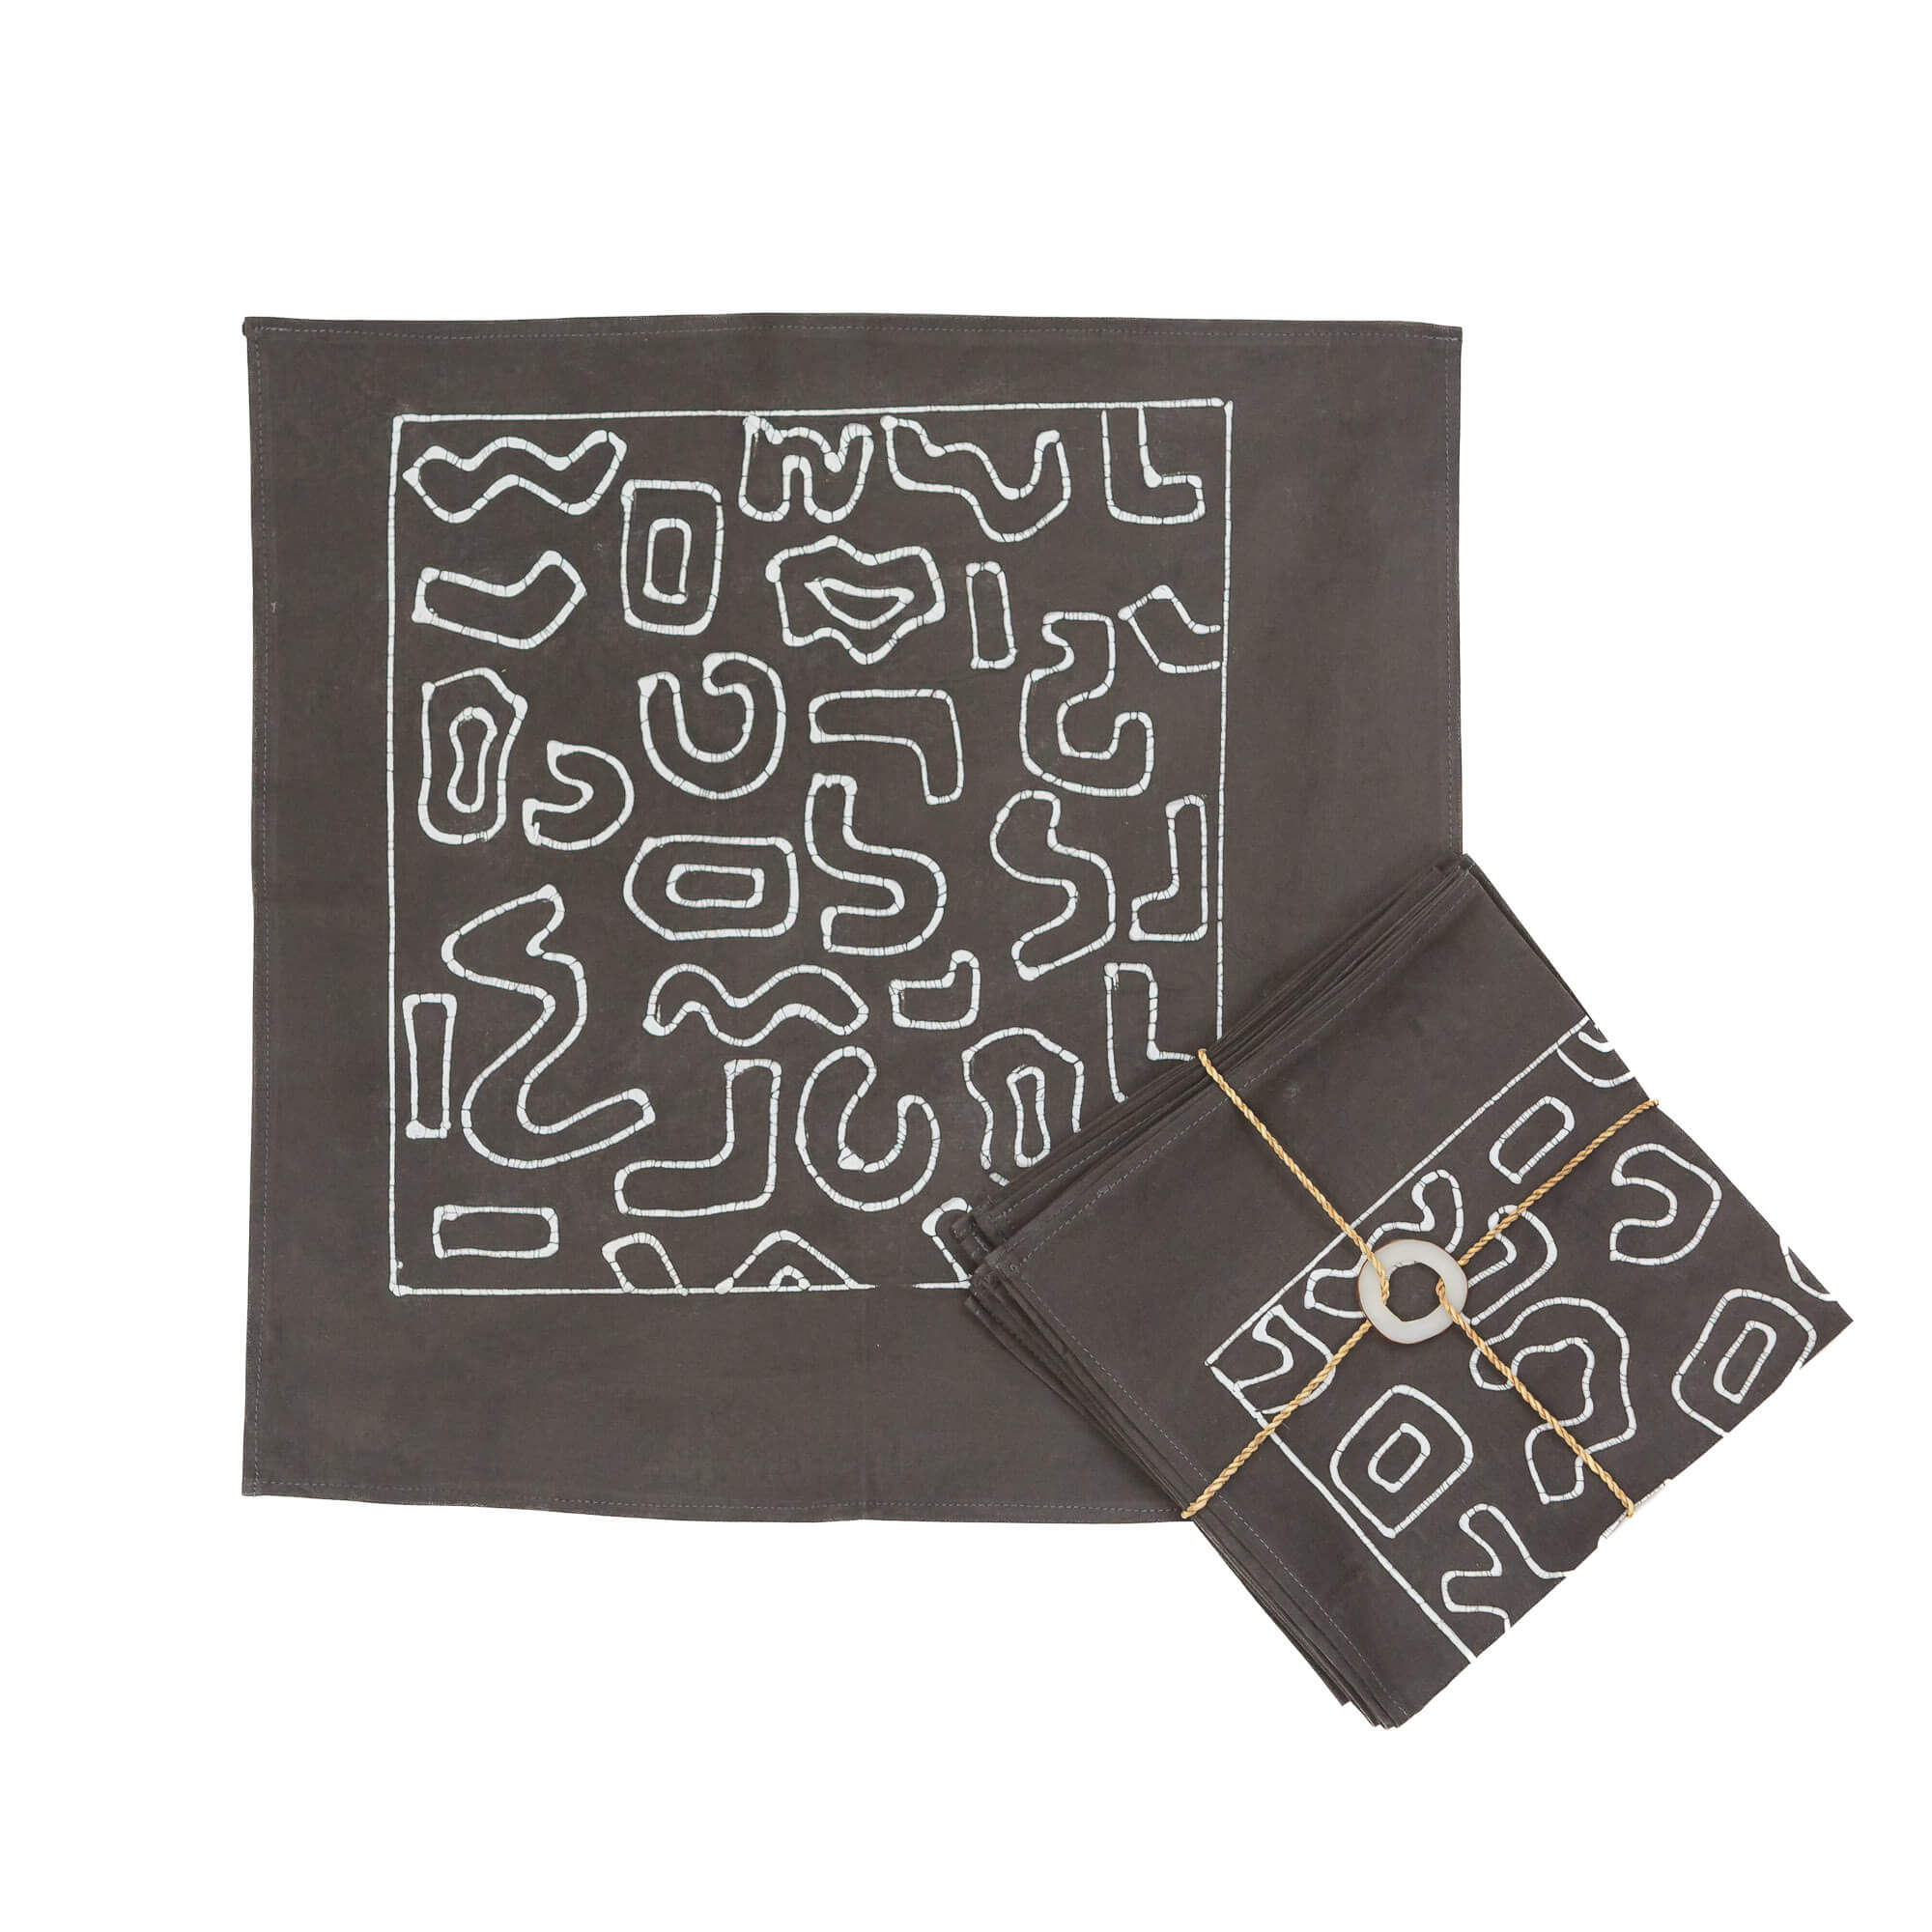 The perfect bohemian chic charcoal napkins adorned with a hand-painted squiggle pattern.